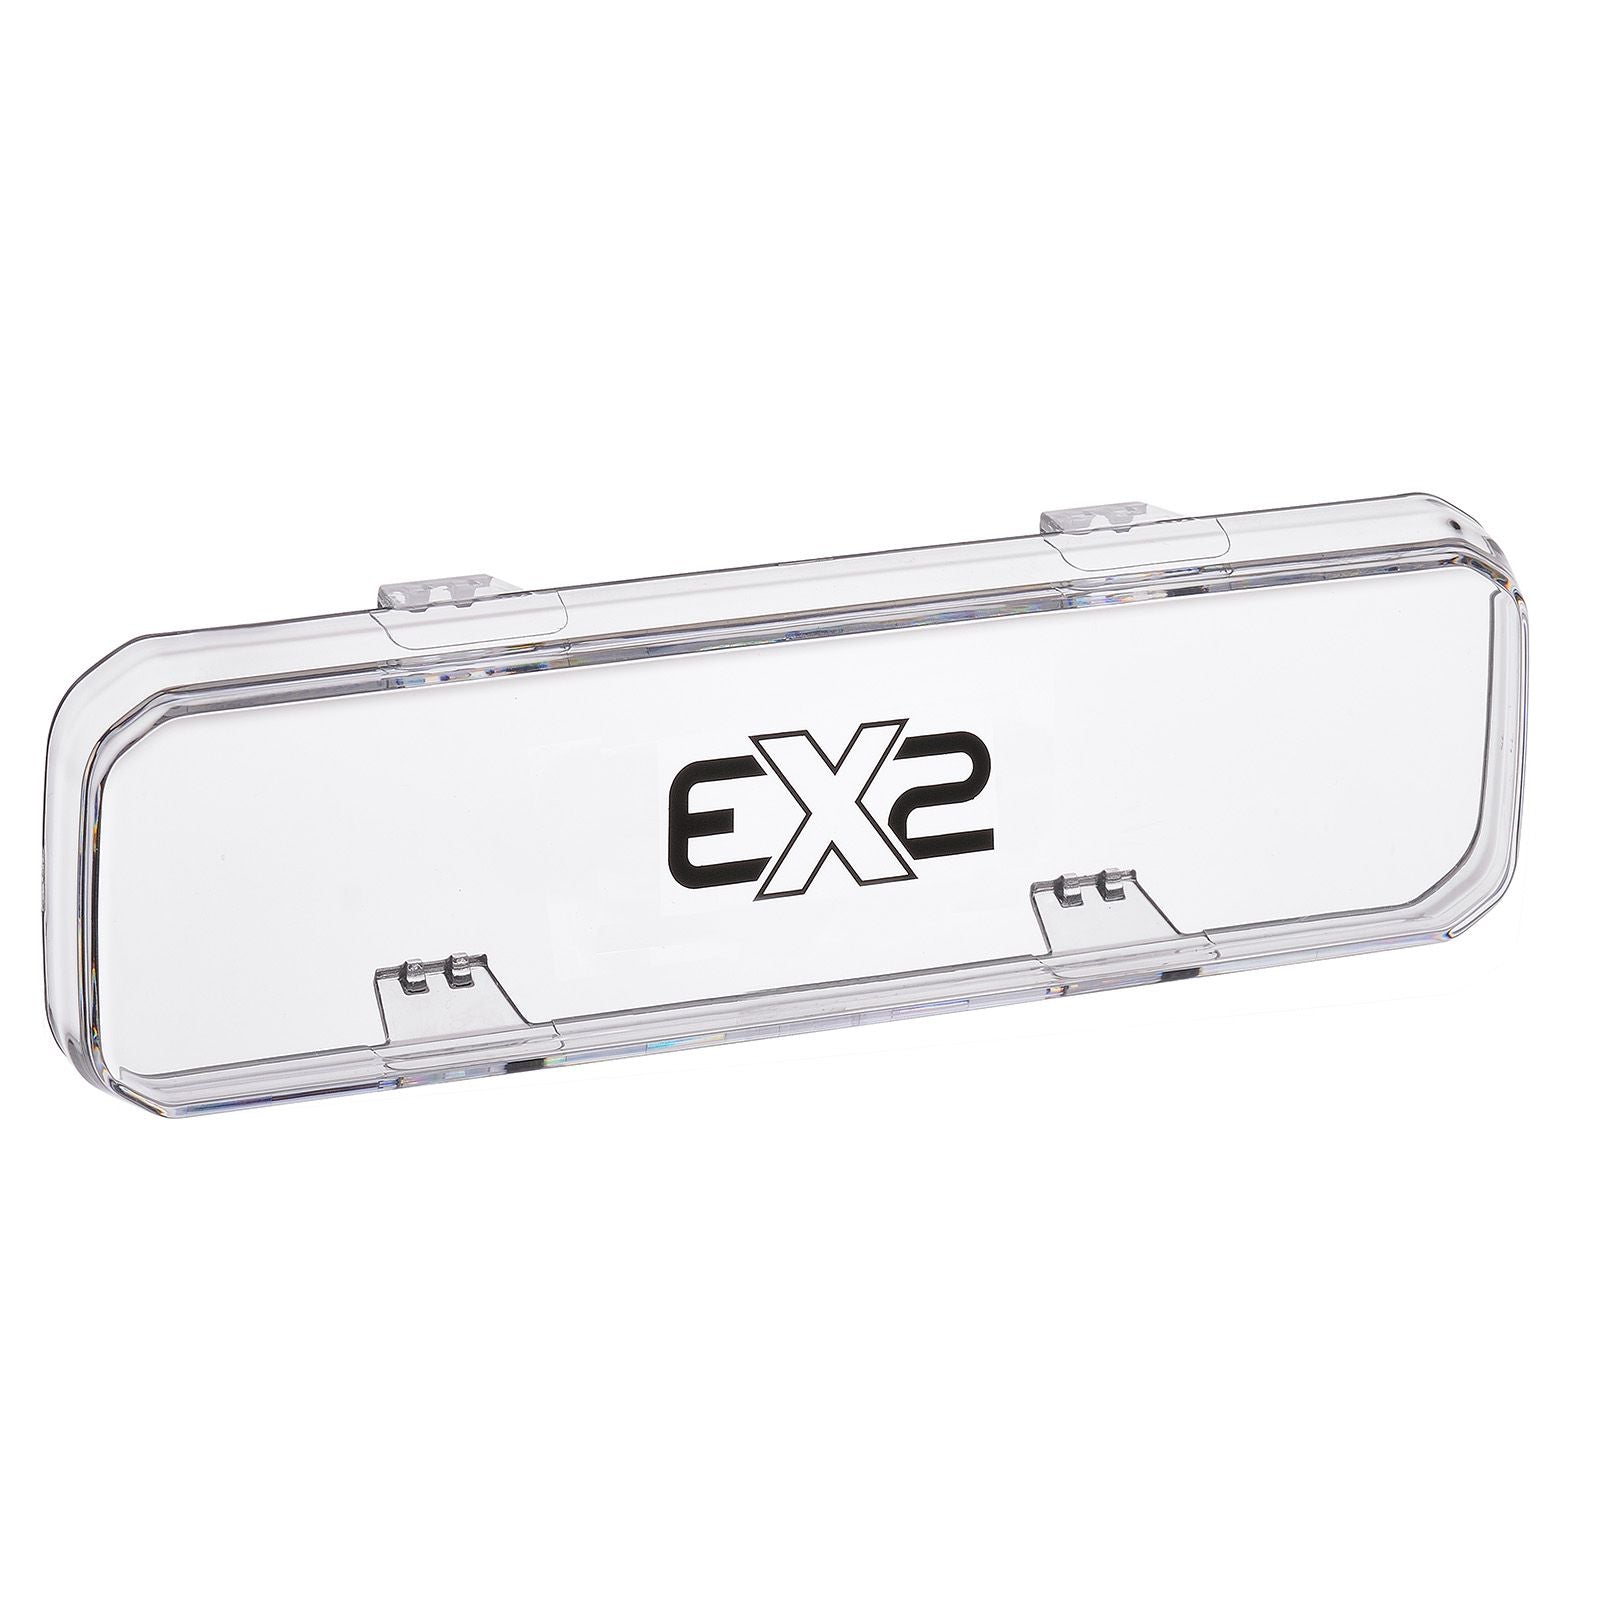 10" DOUBLE ROW CLEAR LENS COVER EX2 EX2R LIGHT BAR ONLY